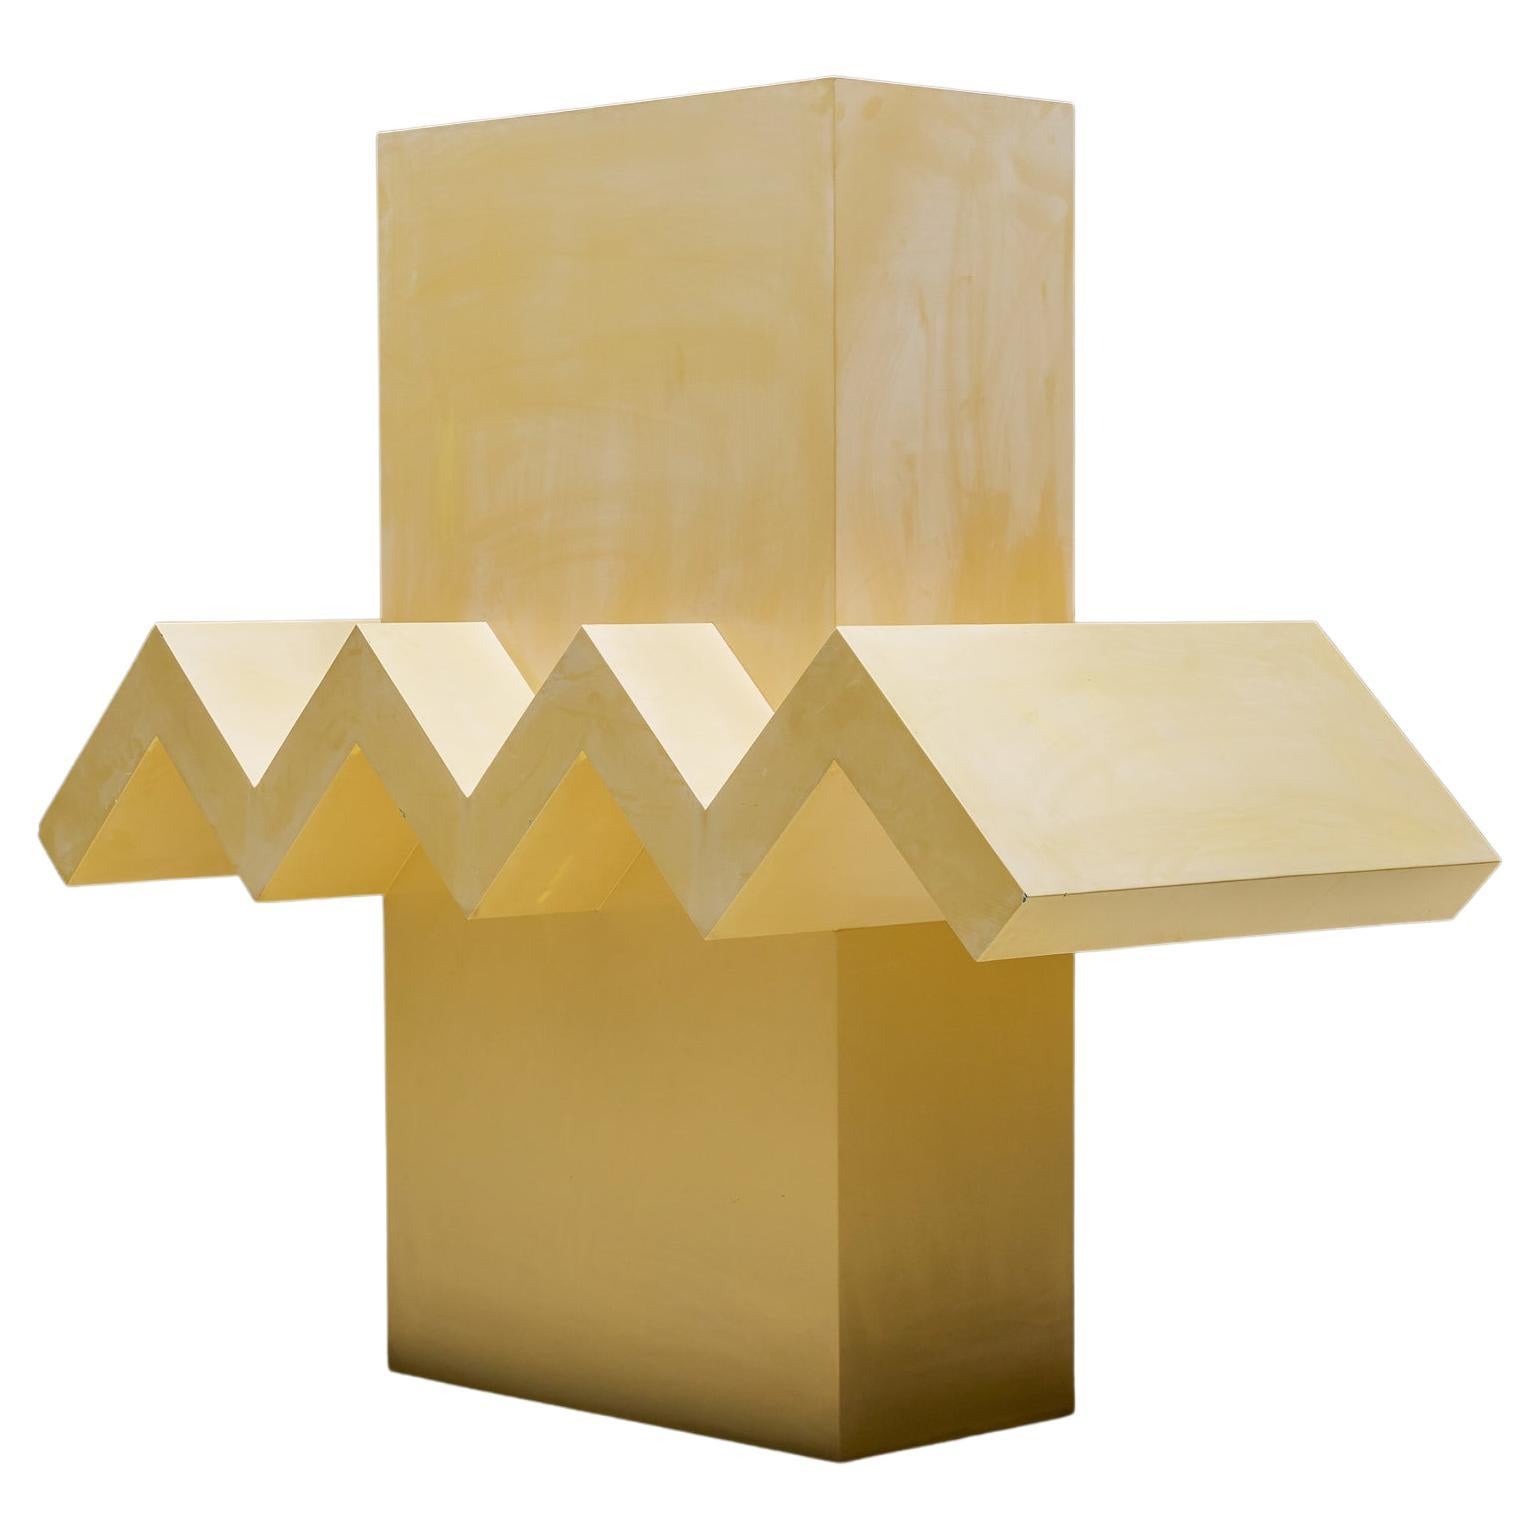 Yellow Abstract Post-Modern Sculpture, Hic & Nunc Belgian Artworks, 1989 For Sale